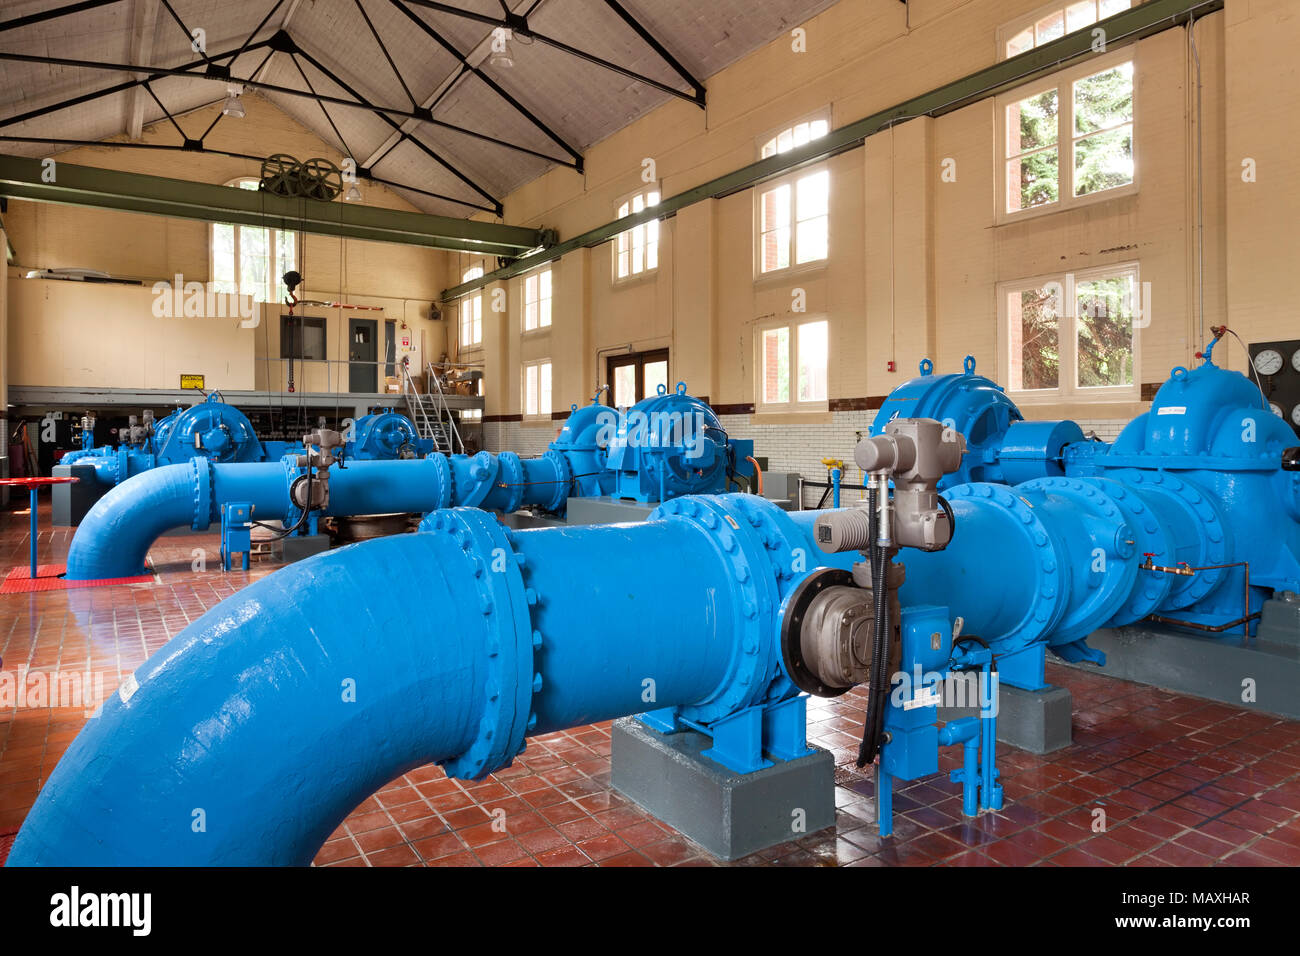 The pumping hall that houses the water pumps at Toronto's High Level Pumping Station. Toronto, Ontario, Canada. Stock Photo